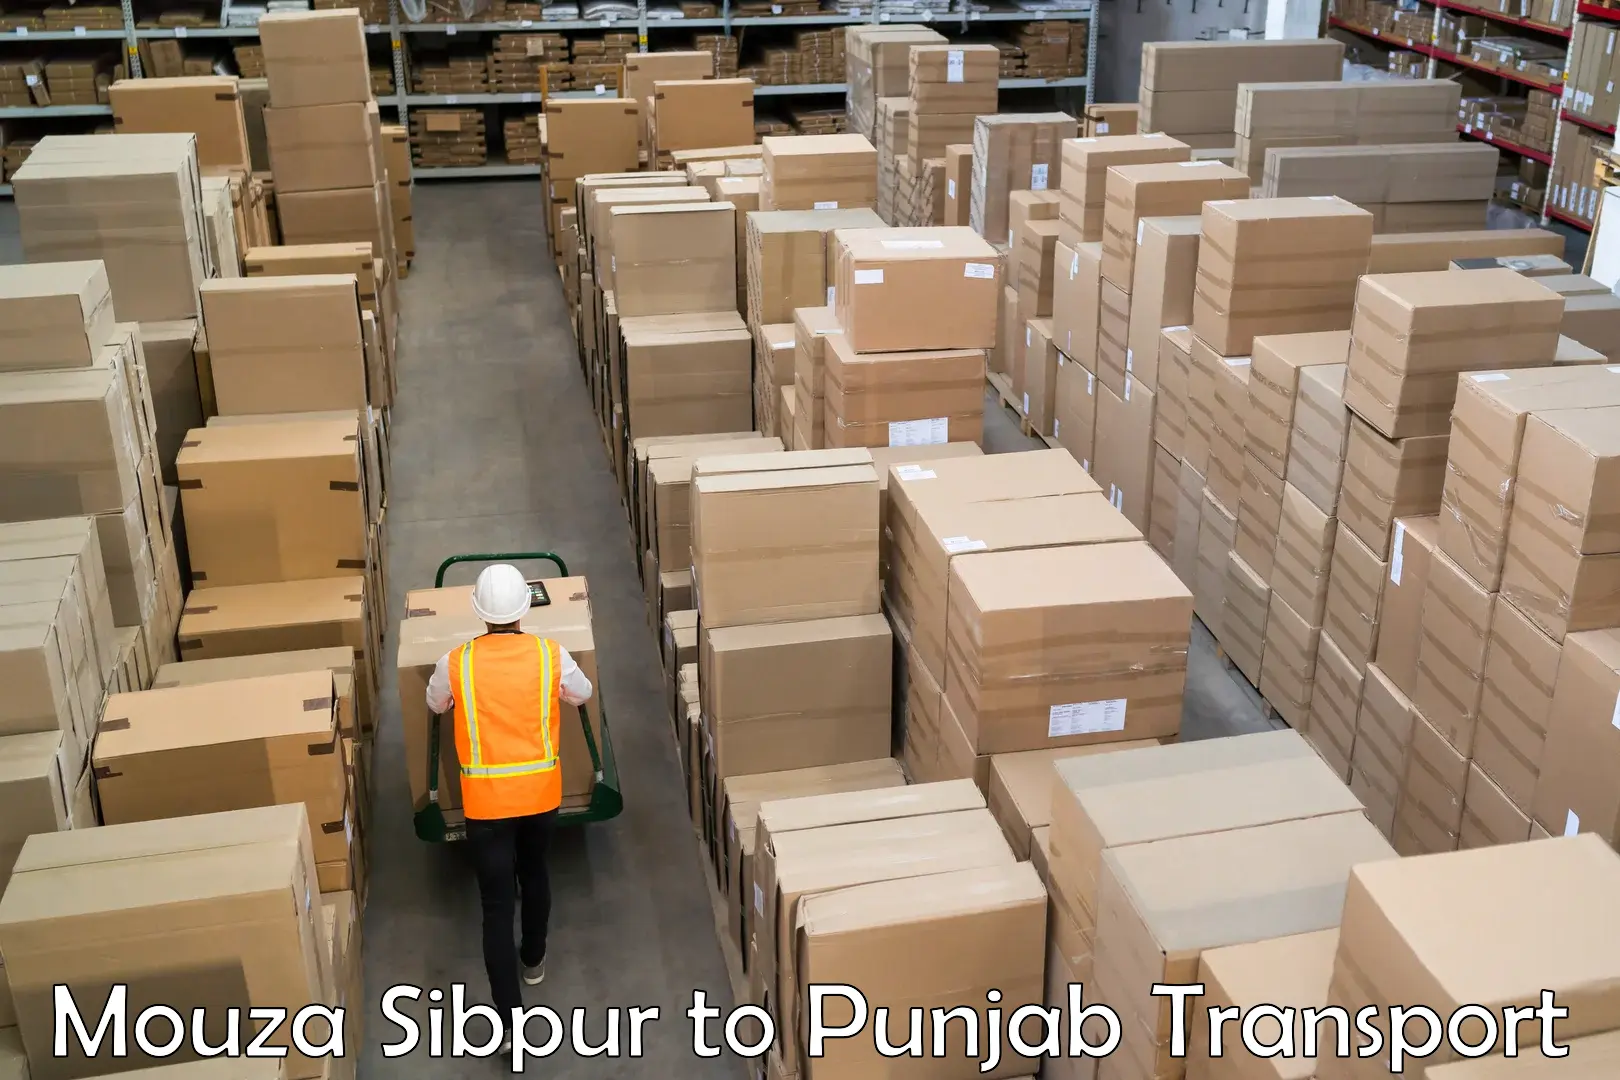 Luggage transport services Mouza Sibpur to Sultanpur Lodhi